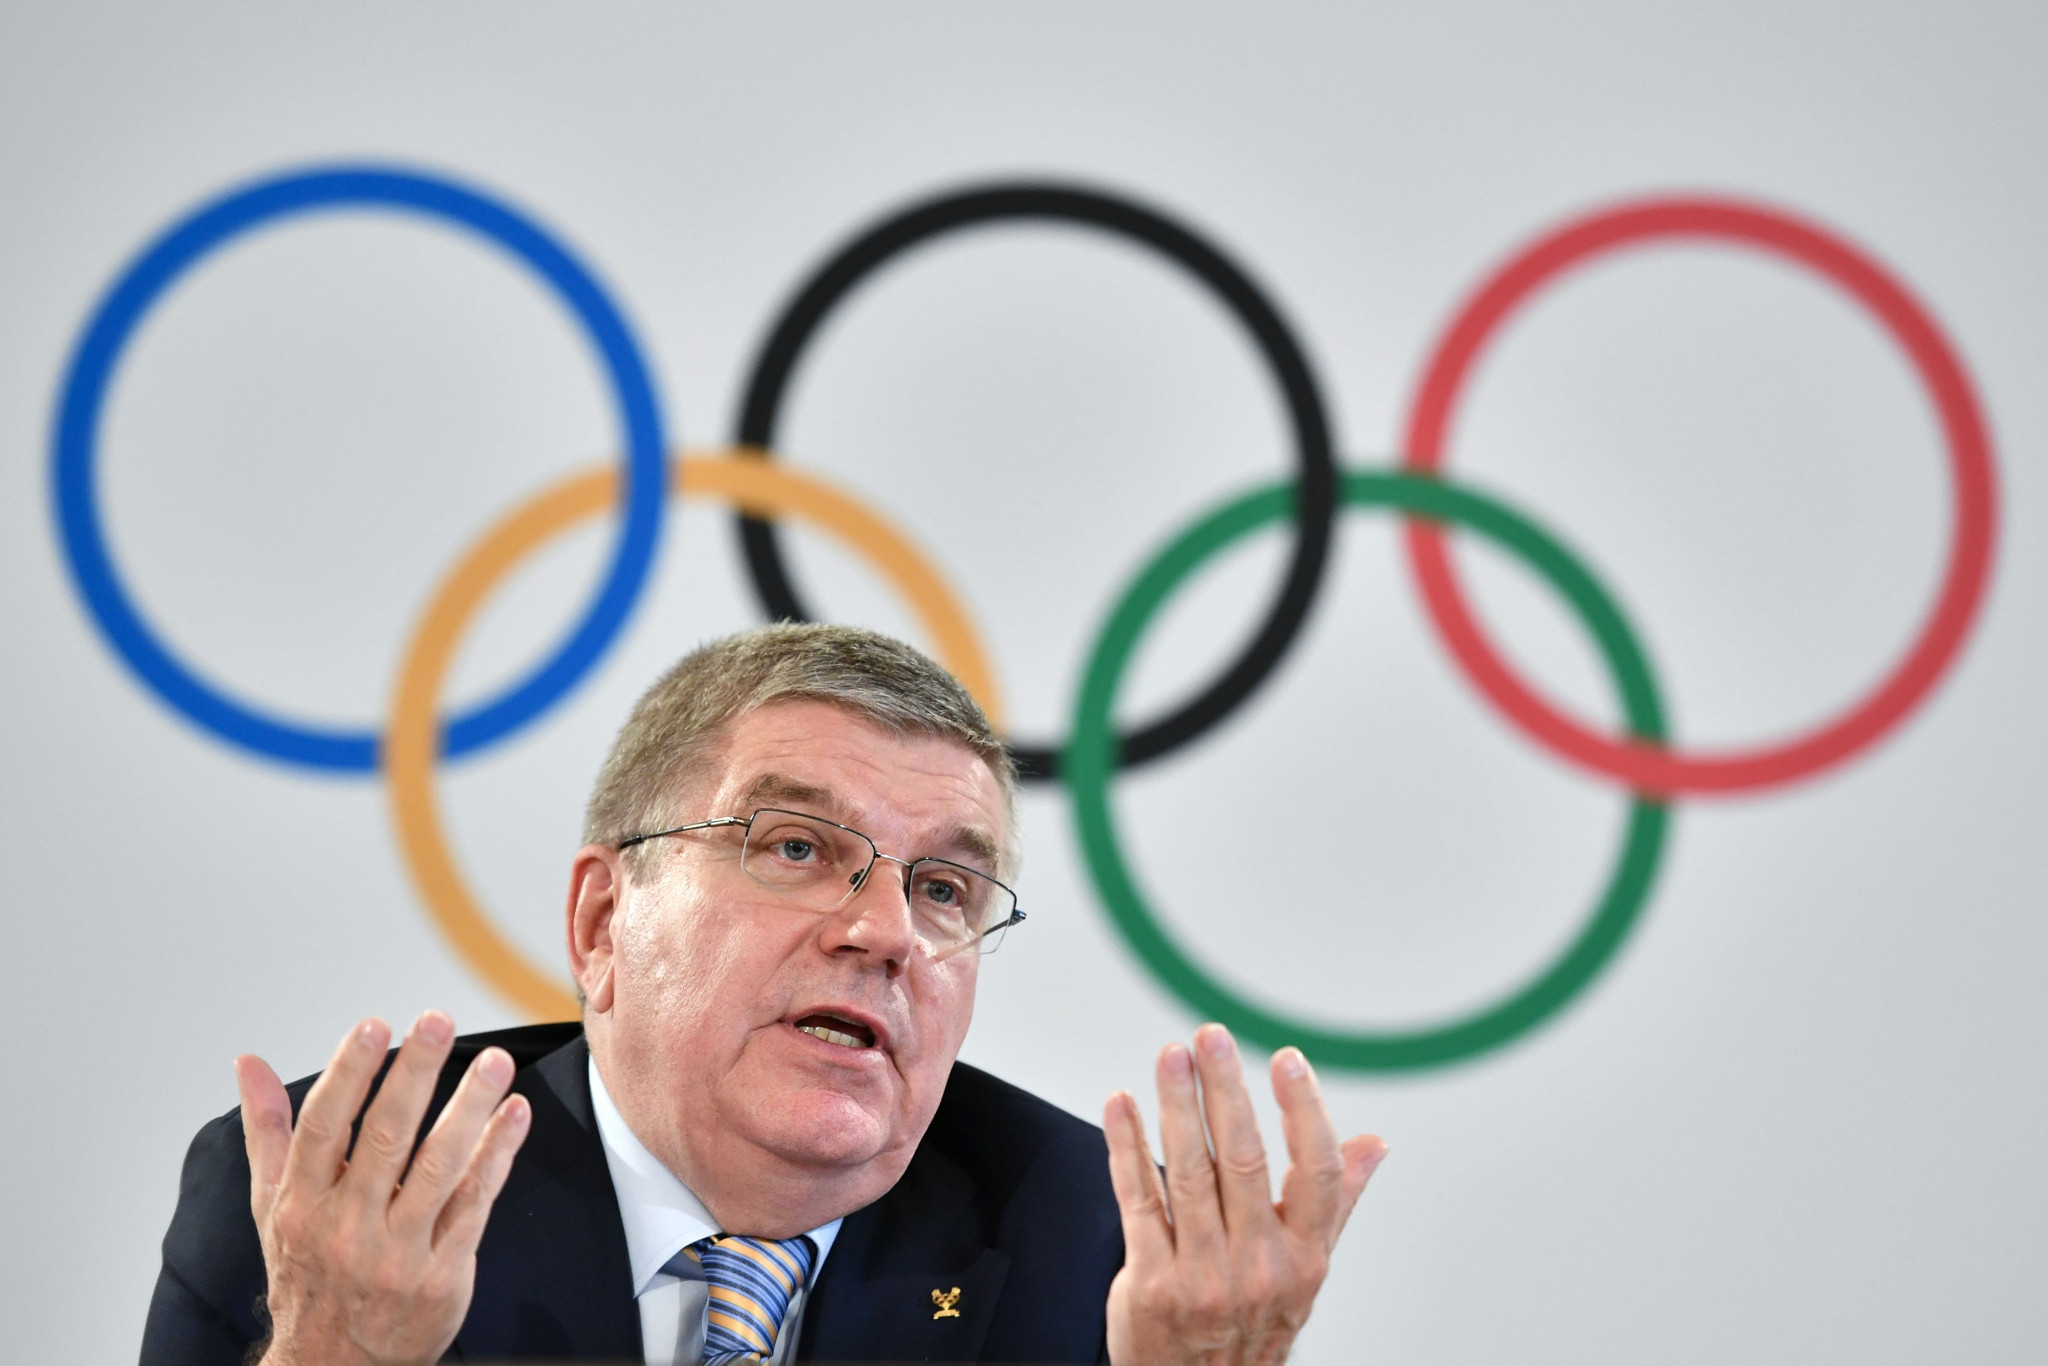 Thomas Bach conceded that doping will always happen earlier this month ©Getty Images